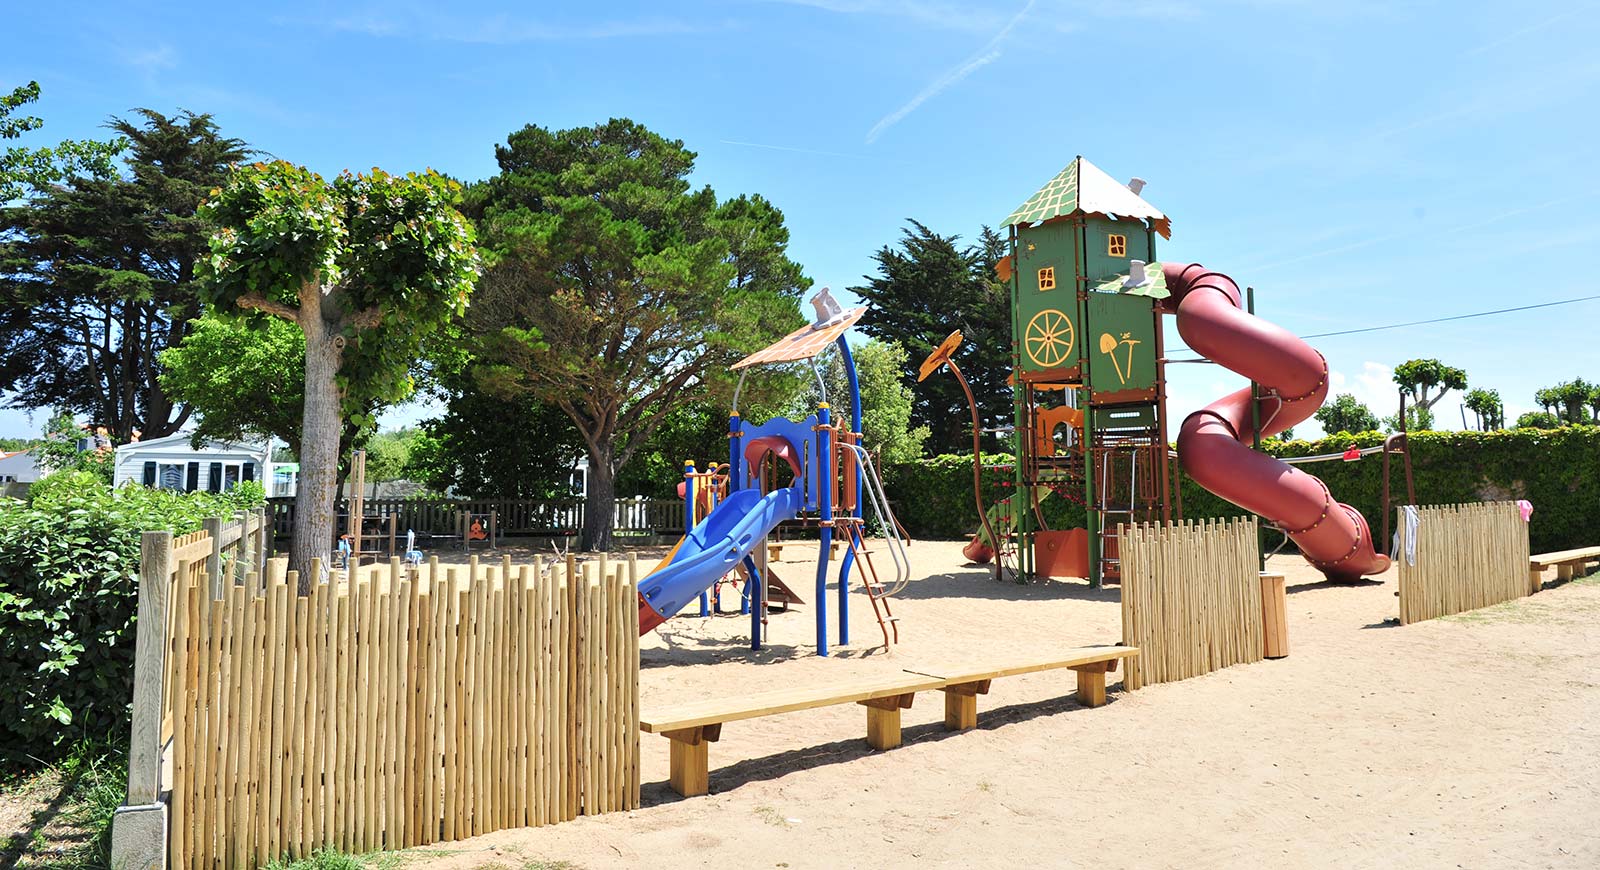 The children's playground with slides and play structure at the campsite in Saint-Hilaire-de-Riez